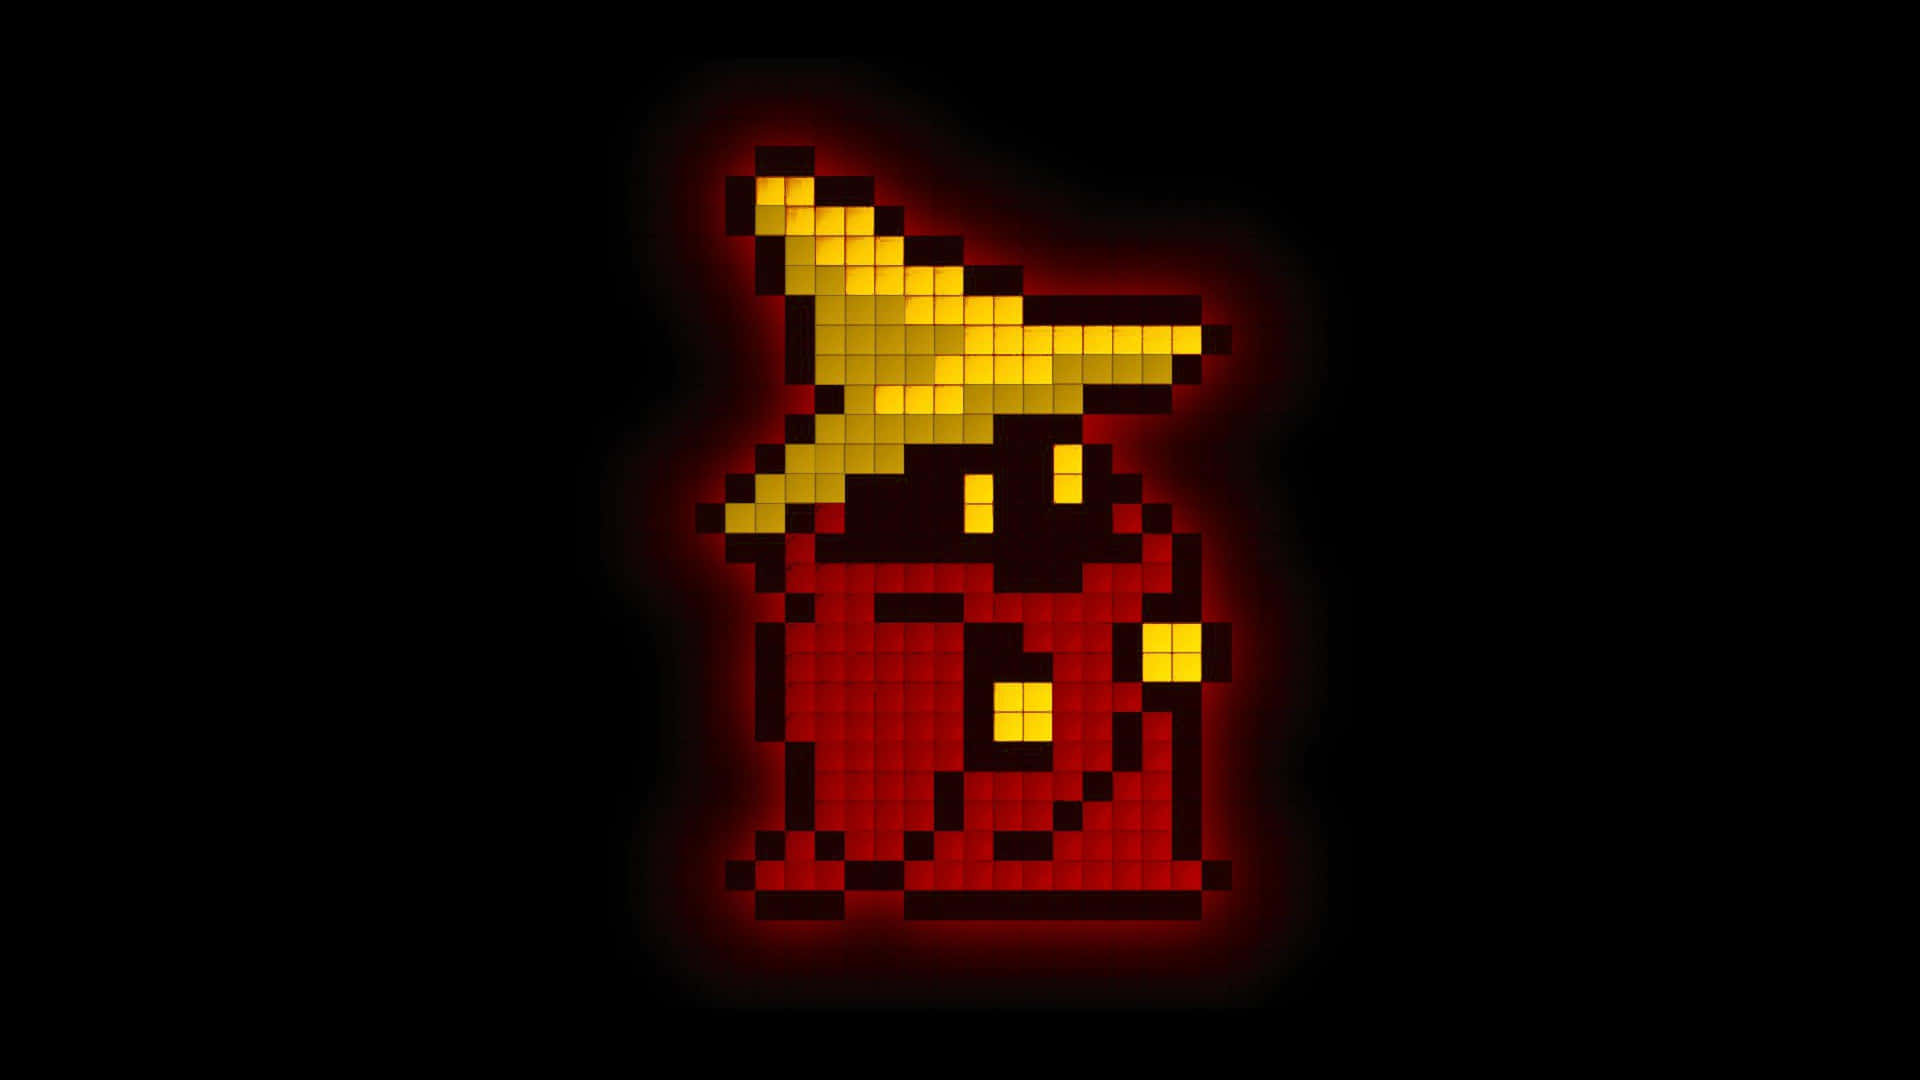 A Pixel Art Image Of A Red Hat With A Yellow Hat